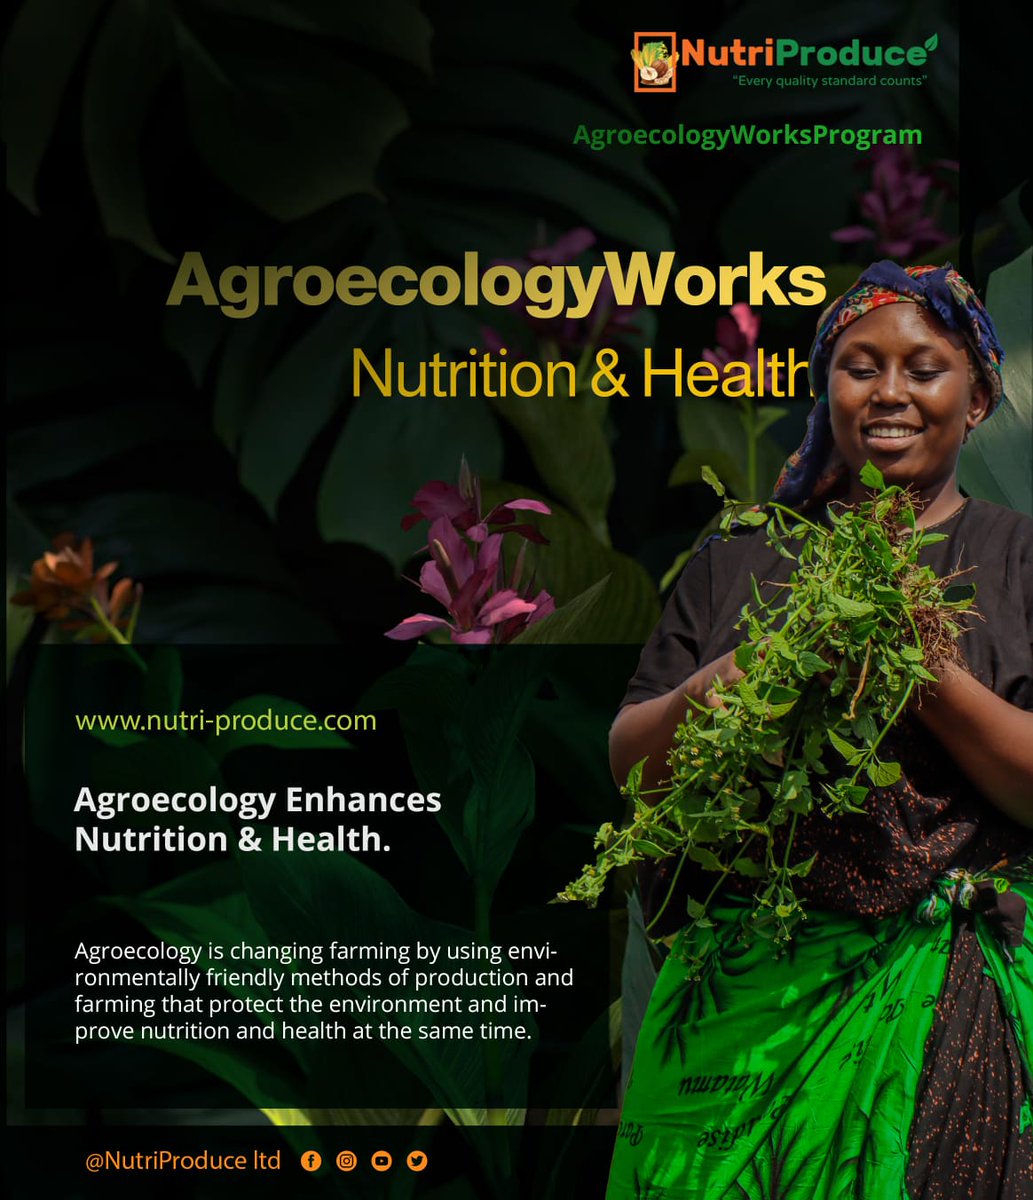 #AgroecologyWorks
🥕🌽🥦🍍🫒🥬🫛

#Agroecology's emphasis on #sustainable, #diverse, and #community-oriented #farming practices leads to improved #nutrition and health outcomes for both individuals and the environment. By fostering #biodiversity, supporting local communities, and…